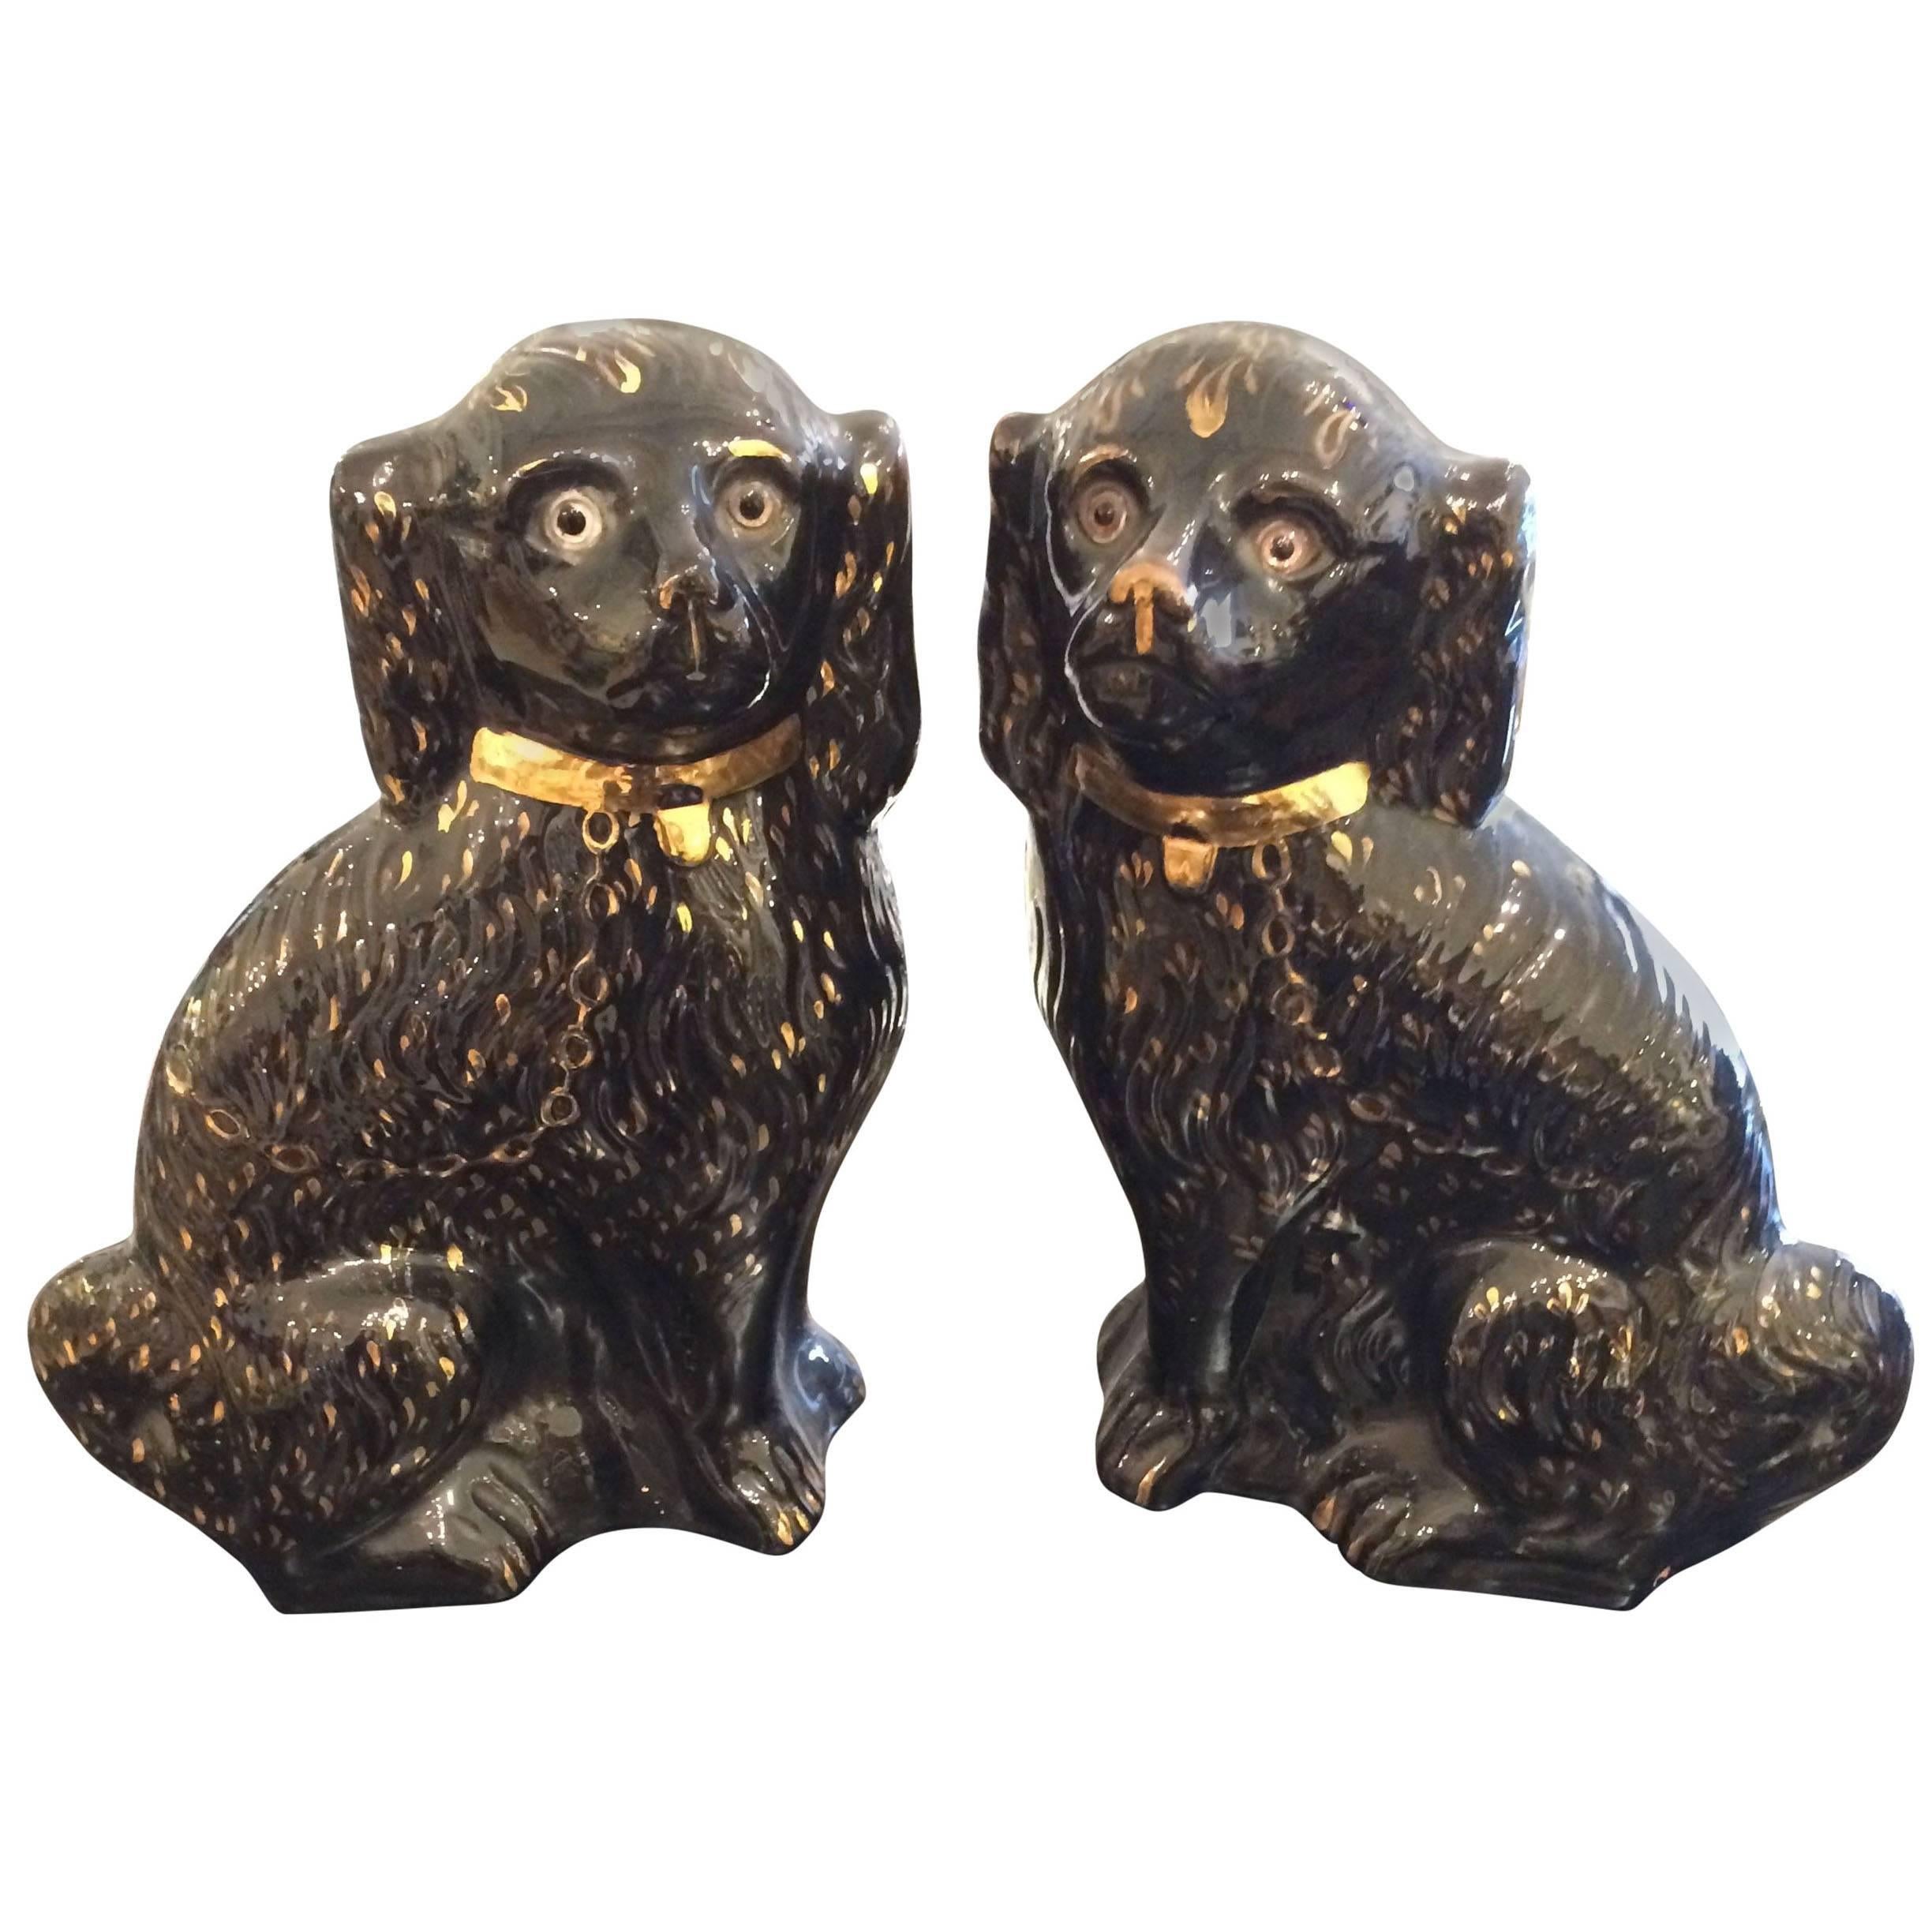 Large Pair of Antique Black and Gold Staffordshire Spaniels